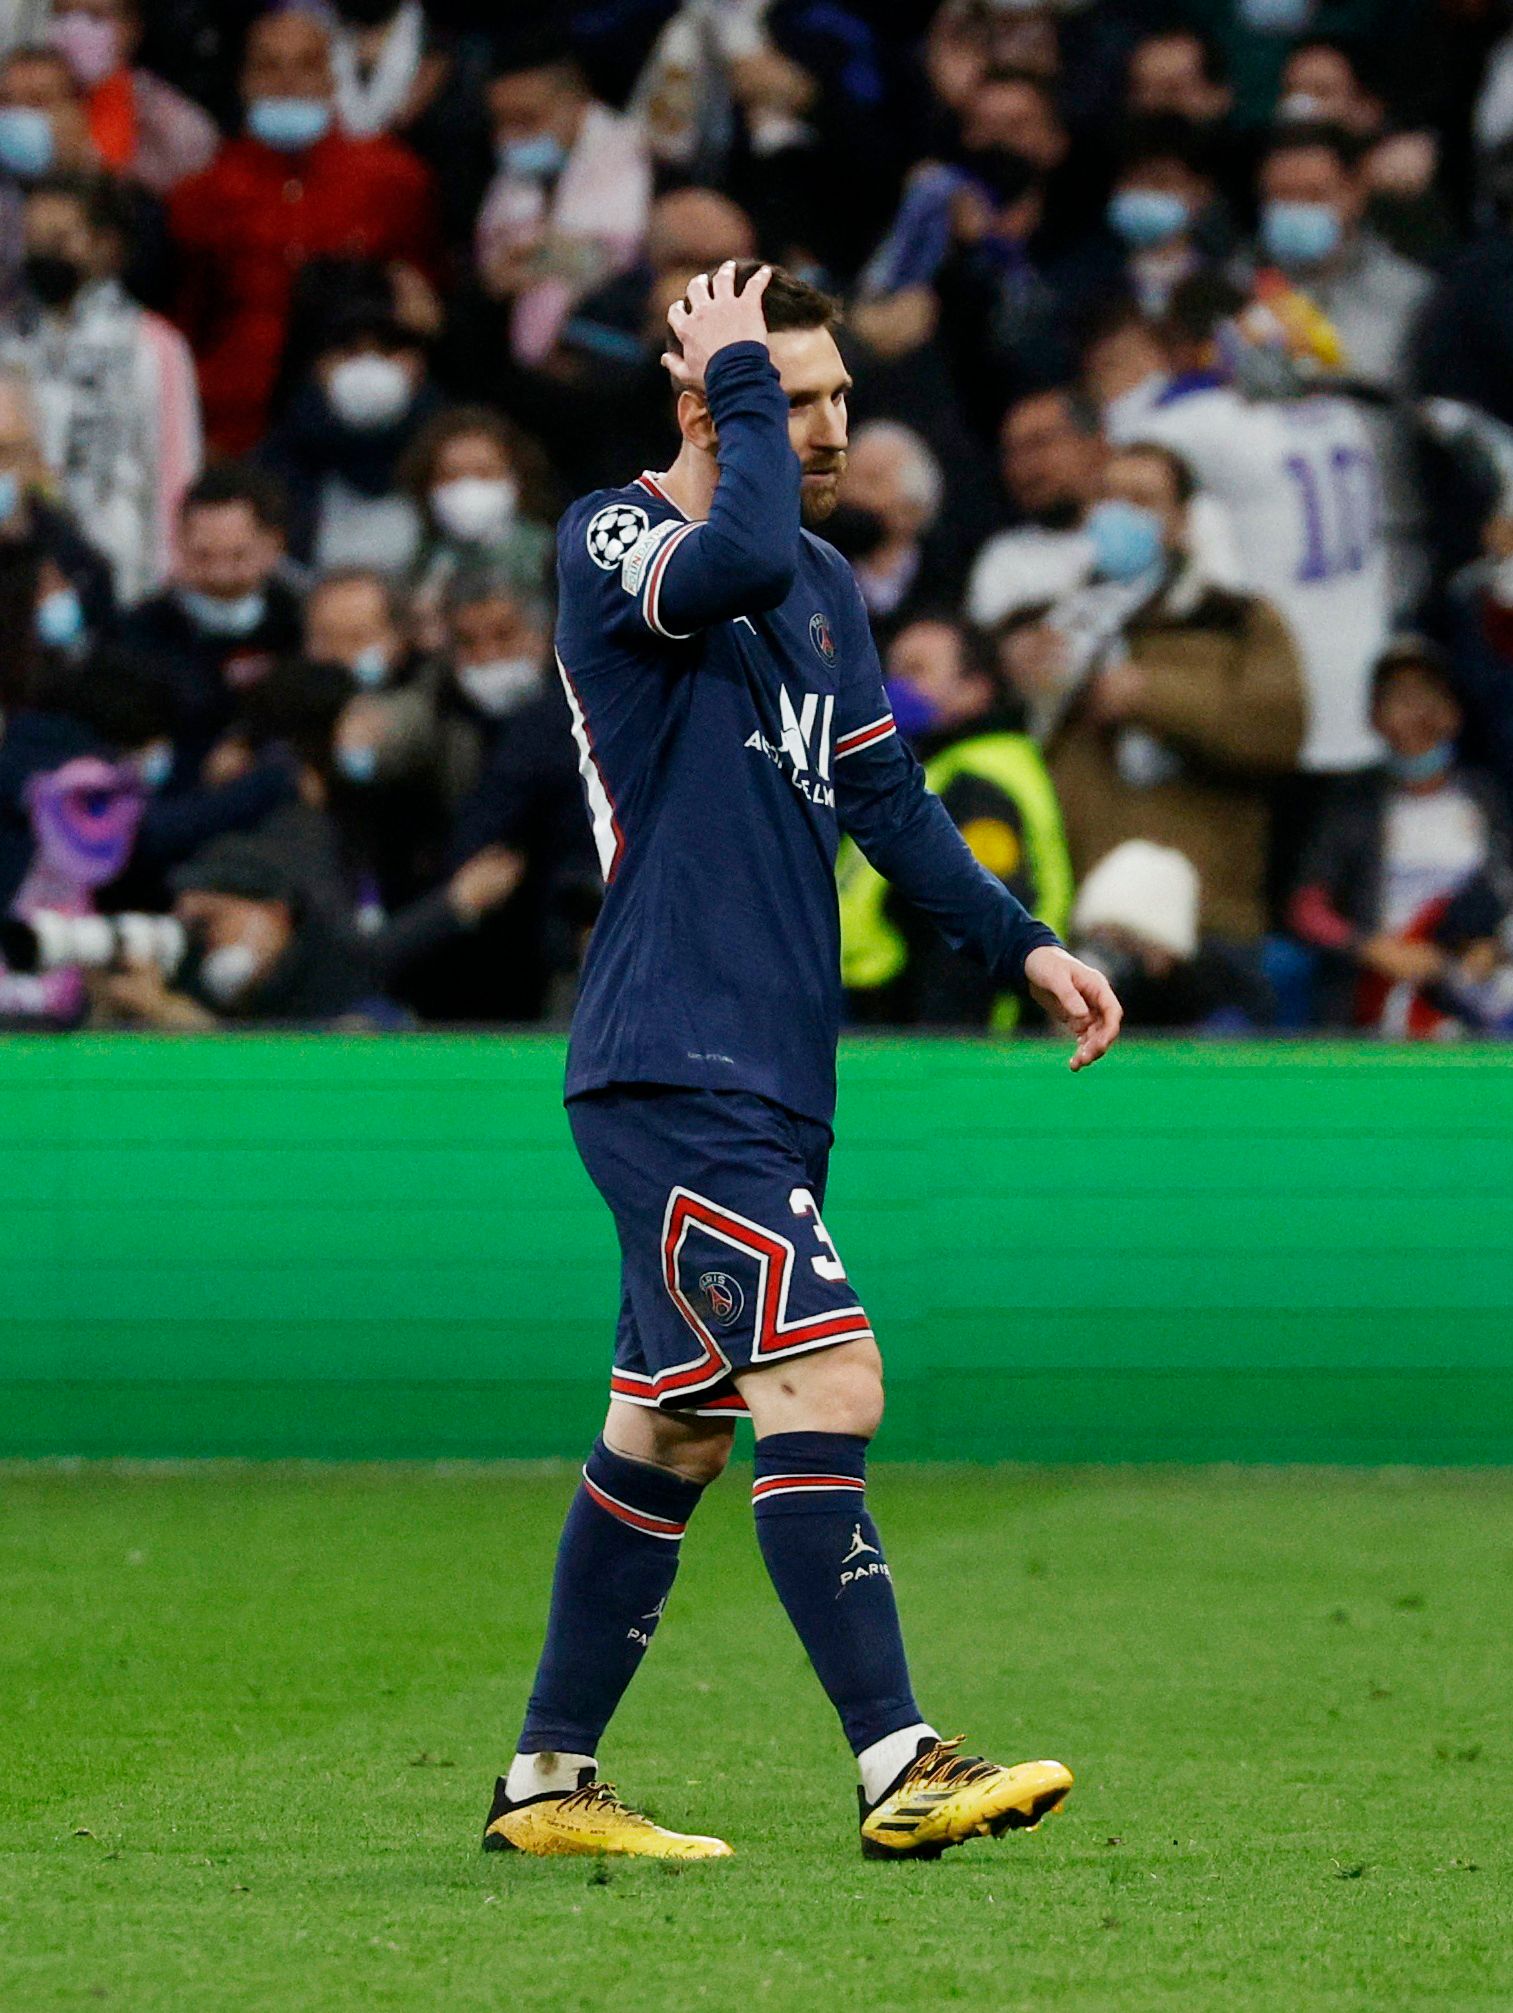 PSG's Messi looks frustrated.